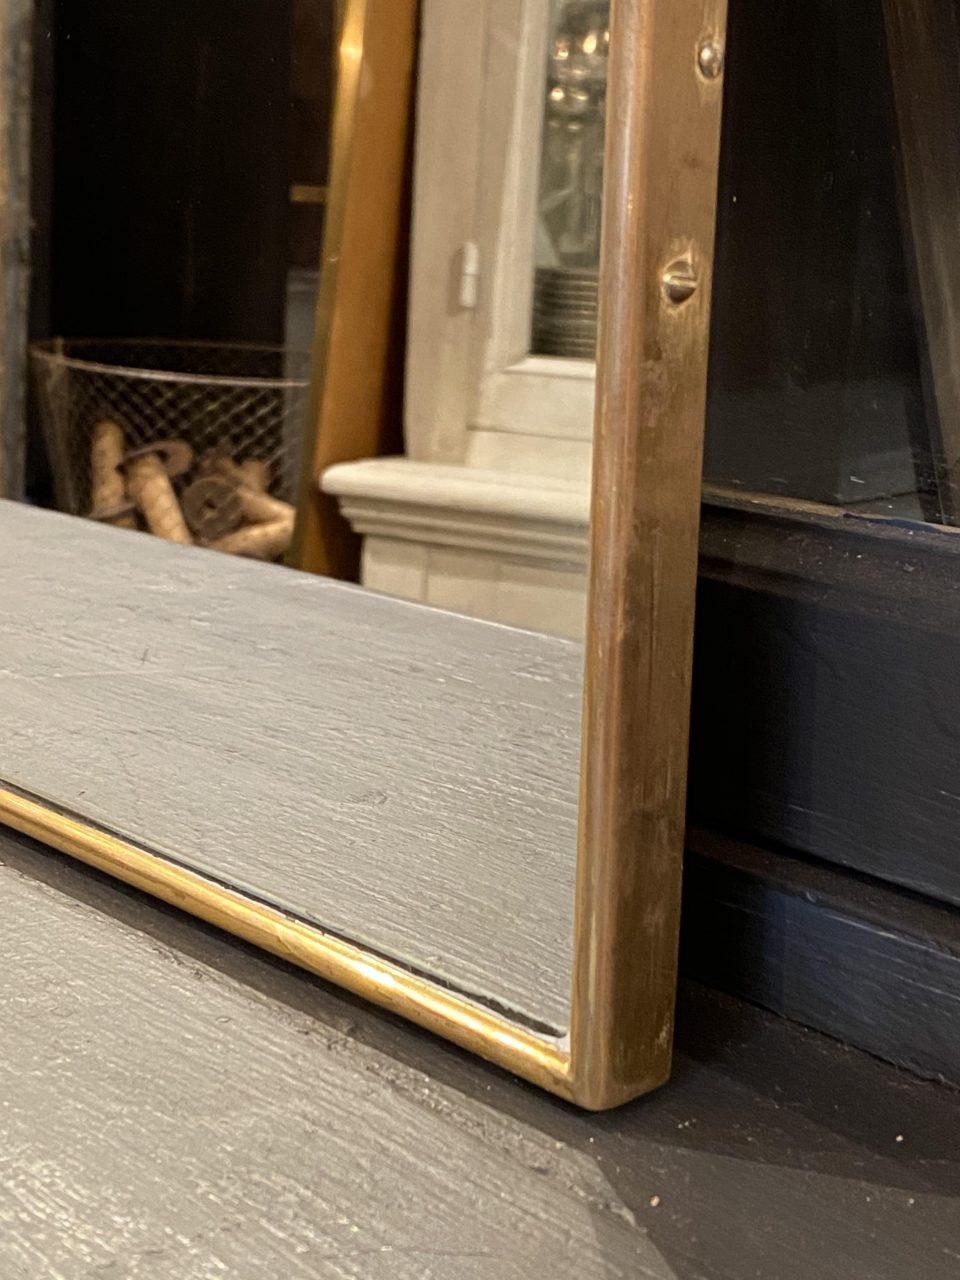 Minimalist and austere midcentury Italian brass mirror from the 1950s-1960s, in a sleek and elegant rectangular shape with a beautiful narrow and shiny brass frame. Original mirrored and stylistically related to the designer Giò Ponti.

The ideal